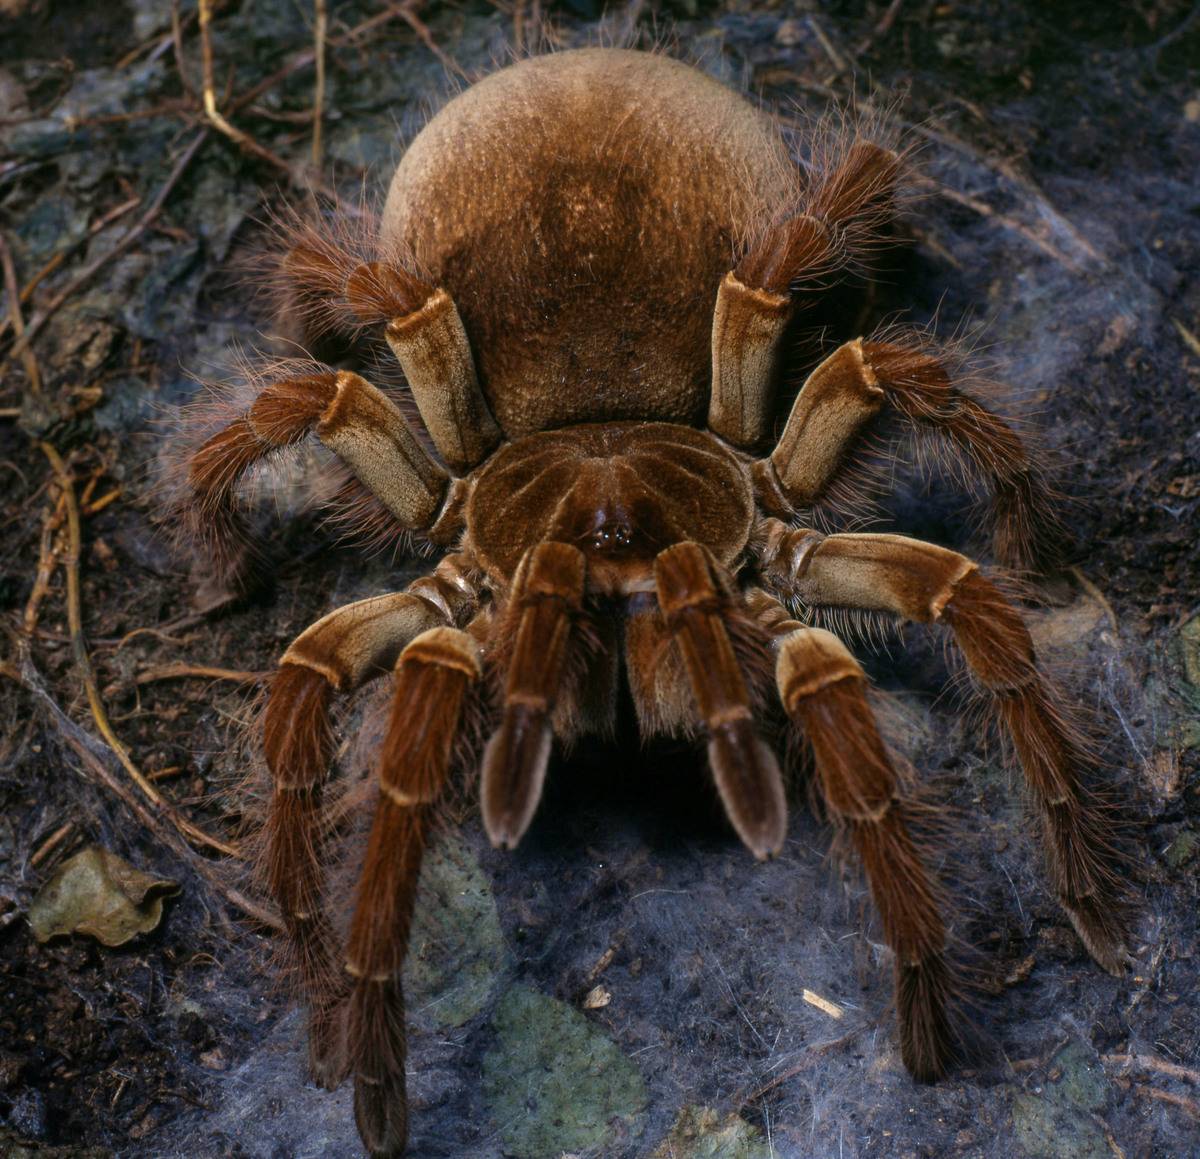 <p>Despite its name, the Goliath Birdeater Tarantula doesn't actually eat birds. In fact, its diet consists of worms. The largest spider in the world, the Goliath Birdeater Tarantula's body length can grow up to five inches and weigh six ounces. </p> <p>With large fangs, this spider is venomous. Thankfully, their venom, while annoying, isn't lethal.</p>